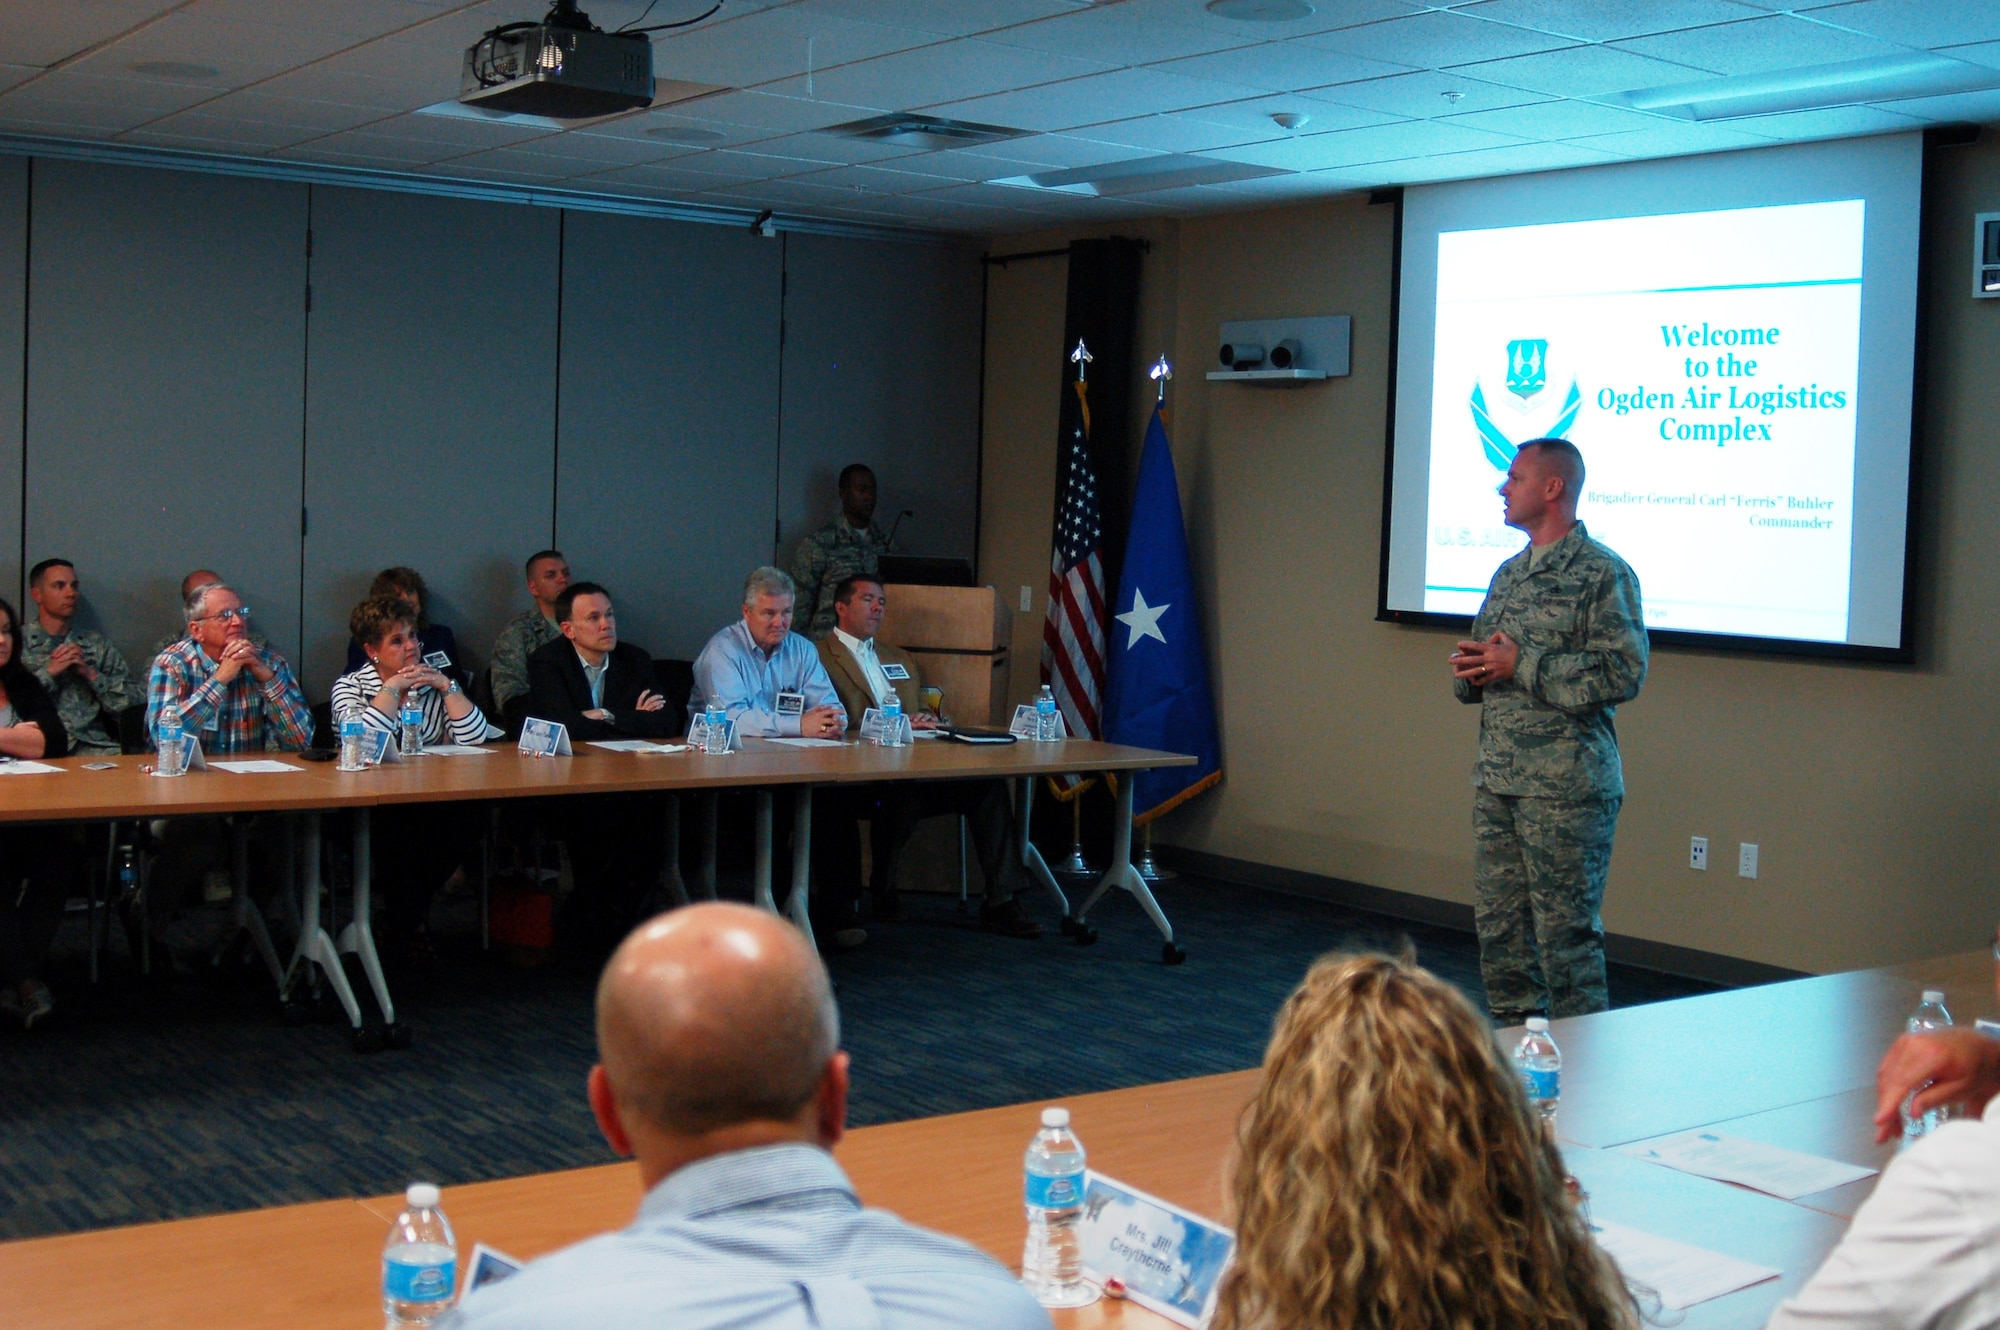 Brig. Gen. Carl Buhler, Ogden Air Logistics Complex commander, speaks to a group of 24 visitors, including state, local and federal leaders, who learned about the ALC's "Road to 30 Percent Depot Flow Day Reduction." (U.S. Air Force photo)